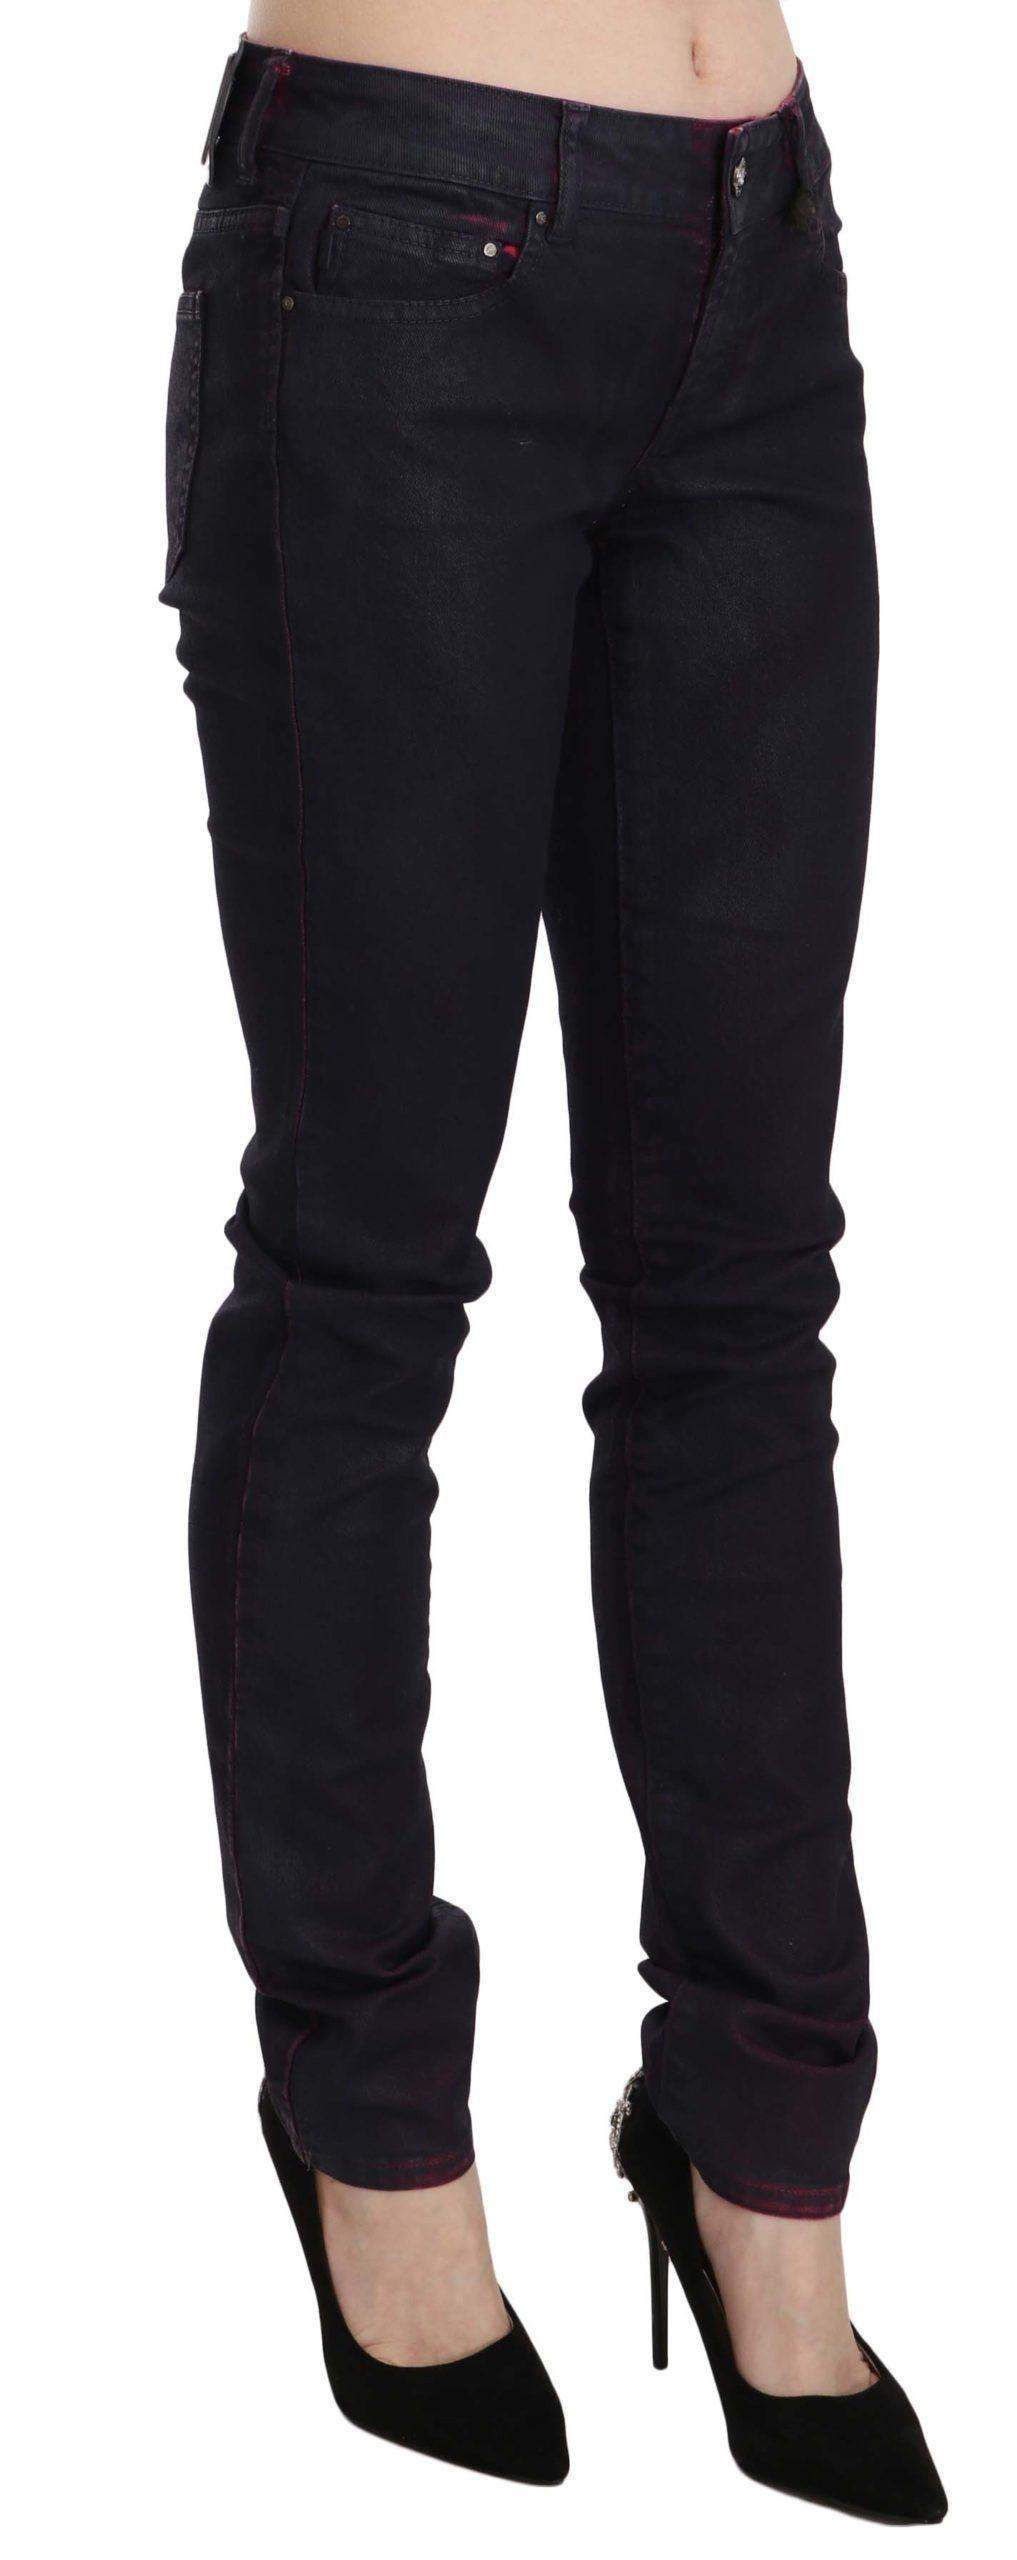 Just Cavalli Cotton Low Waist Skinny Denim Pants #women, Black, Catch, feed-agegroup-adult, feed-color-black, feed-gender-female, feed-size-W26, Gender_Women, Jeans & Pants - Women - Clothing, Just Cavalli, Kogan, W26, Women - New Arrivals at SEYMAYKA